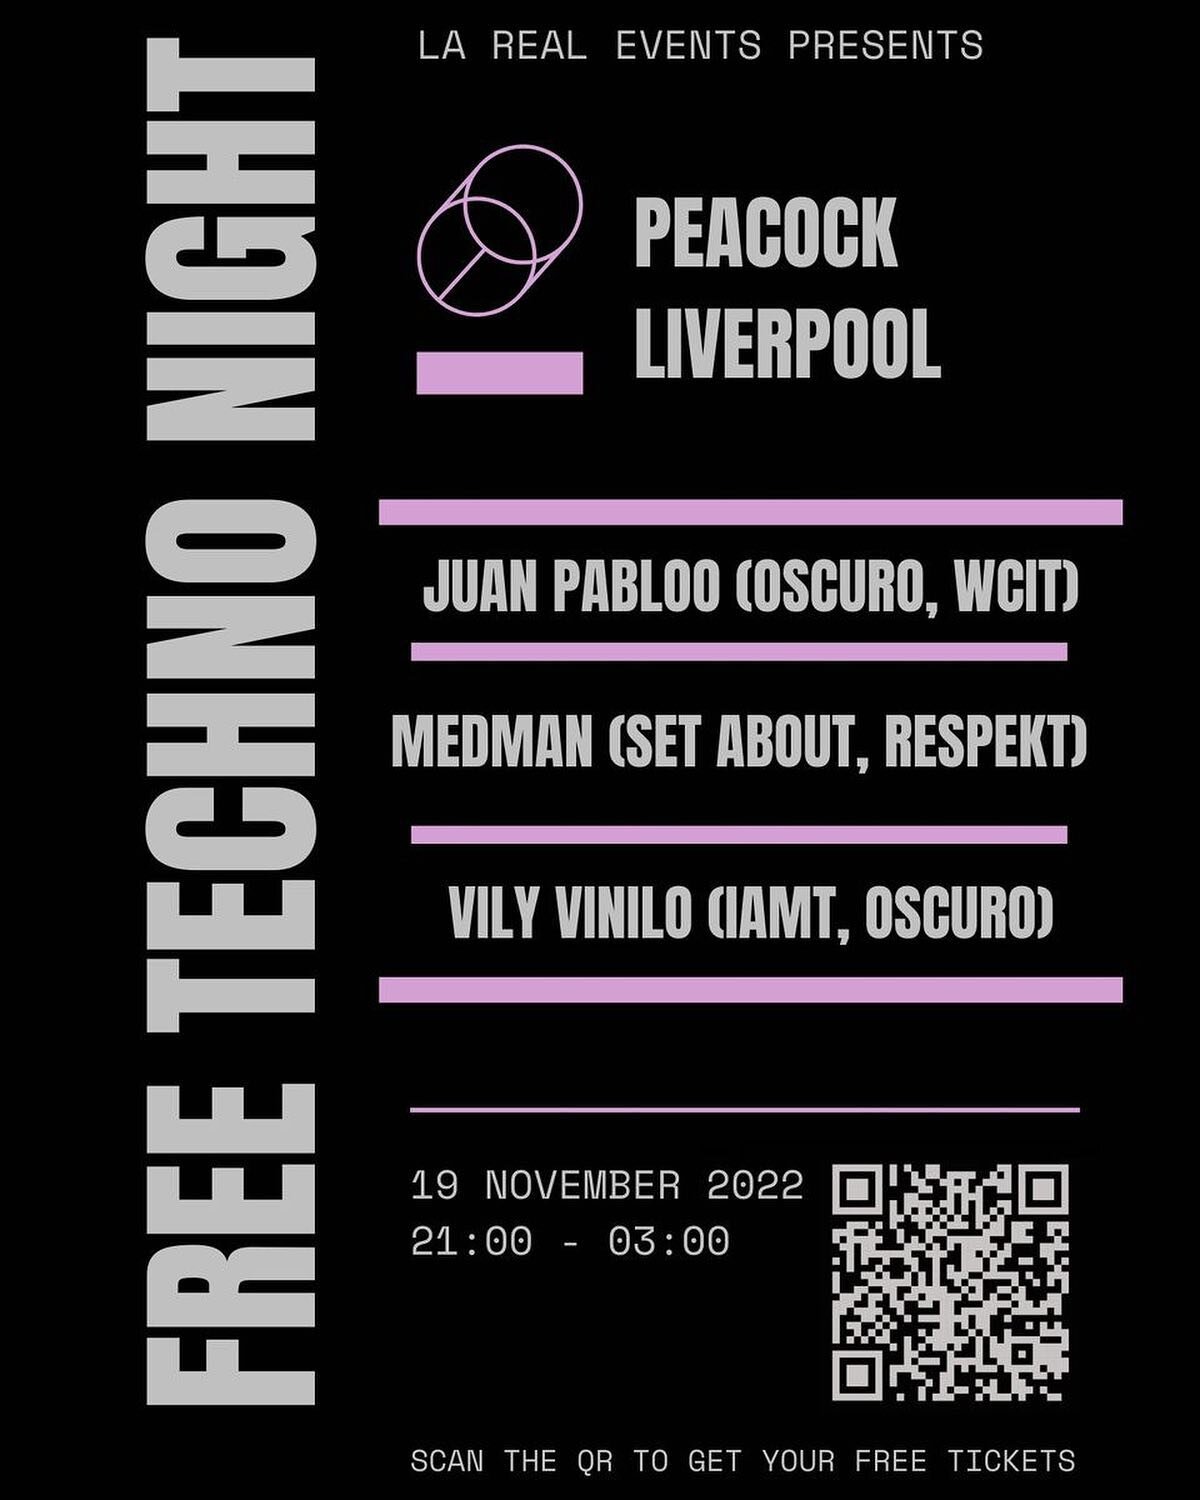 Looking forward to spinning some tracks at this event as @medman_uk &hellip; this Saturday at Peacock in Liverpool .. 
Its a free event too!! Be good to see some faces there